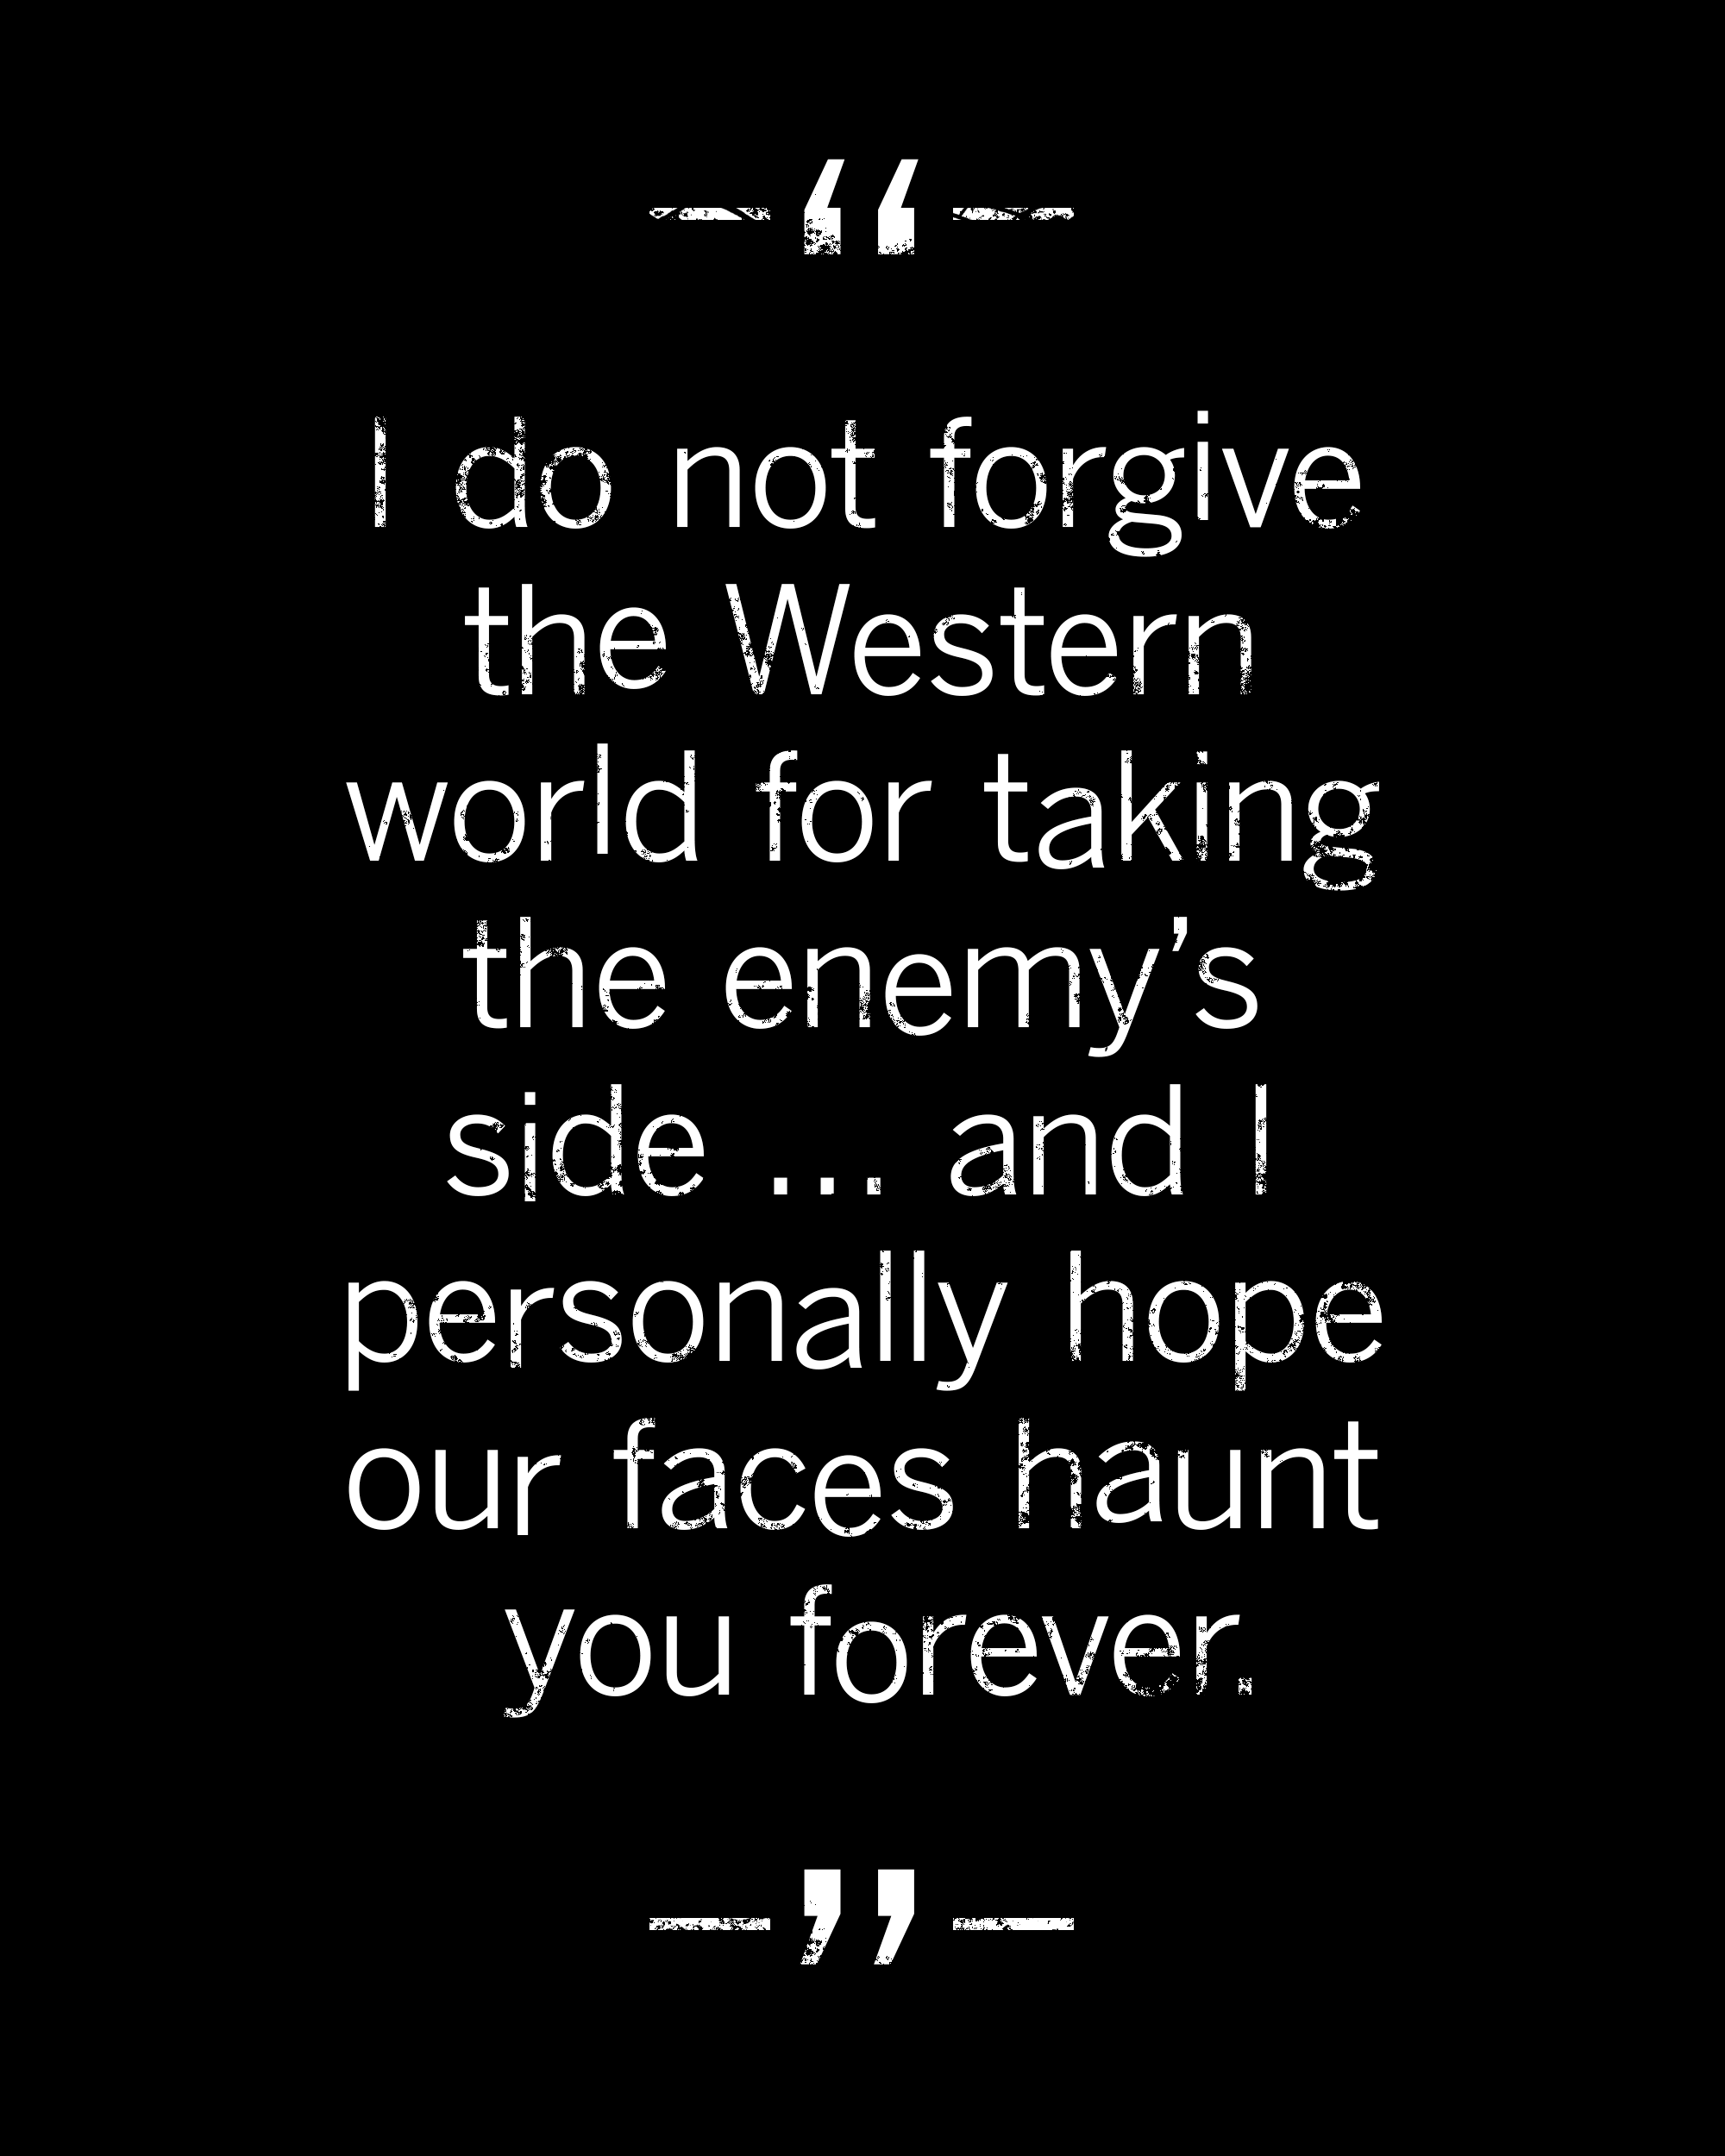 I do not forgive the western world for taking the enemy's side. I hope our faces haunt you forever.